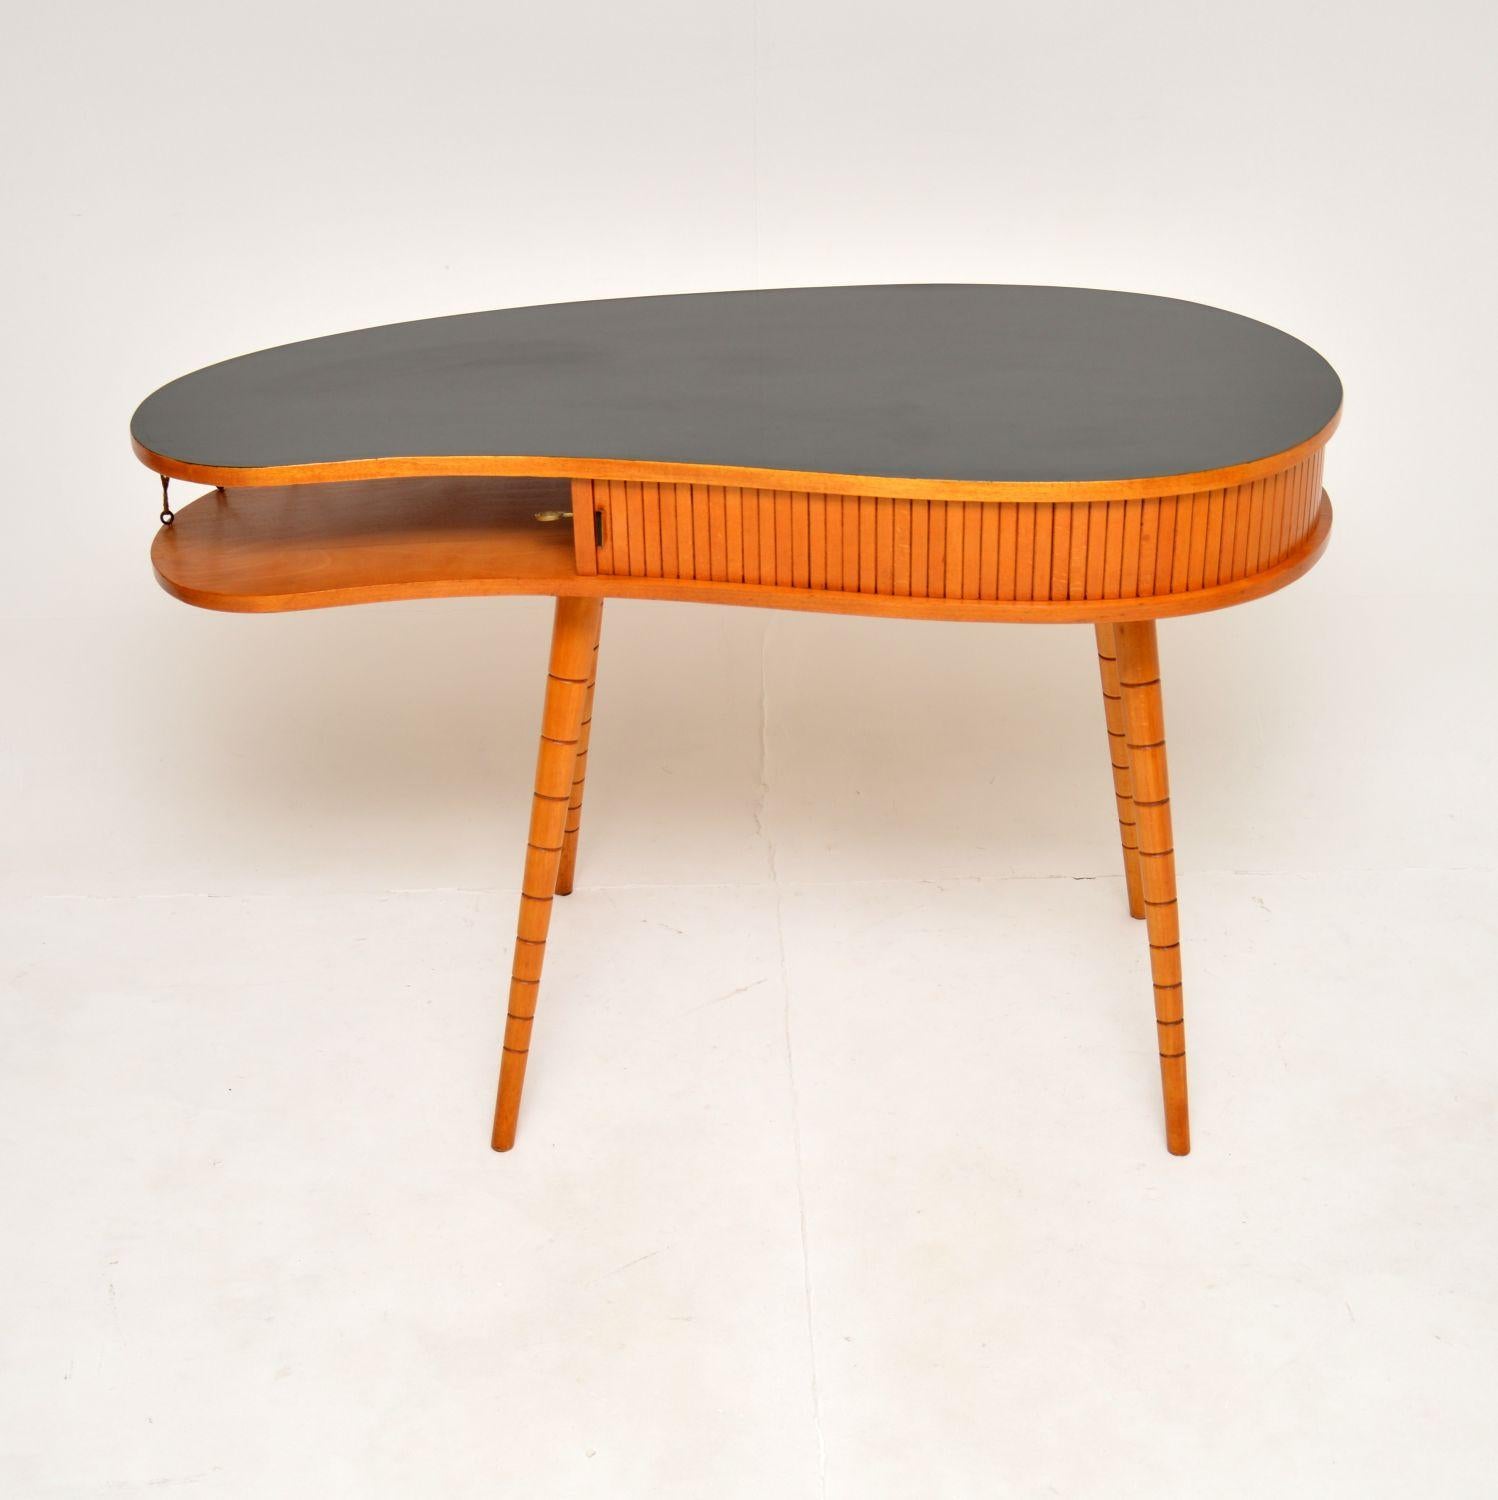 An outstanding vintage kidney shaped desk attributed to Eduard Ludvig, the well known German architect. This was made in Germany, it dates from the 1950’s.

It has a fantastic and very stylish design, the black laminated top has a kidney shape and